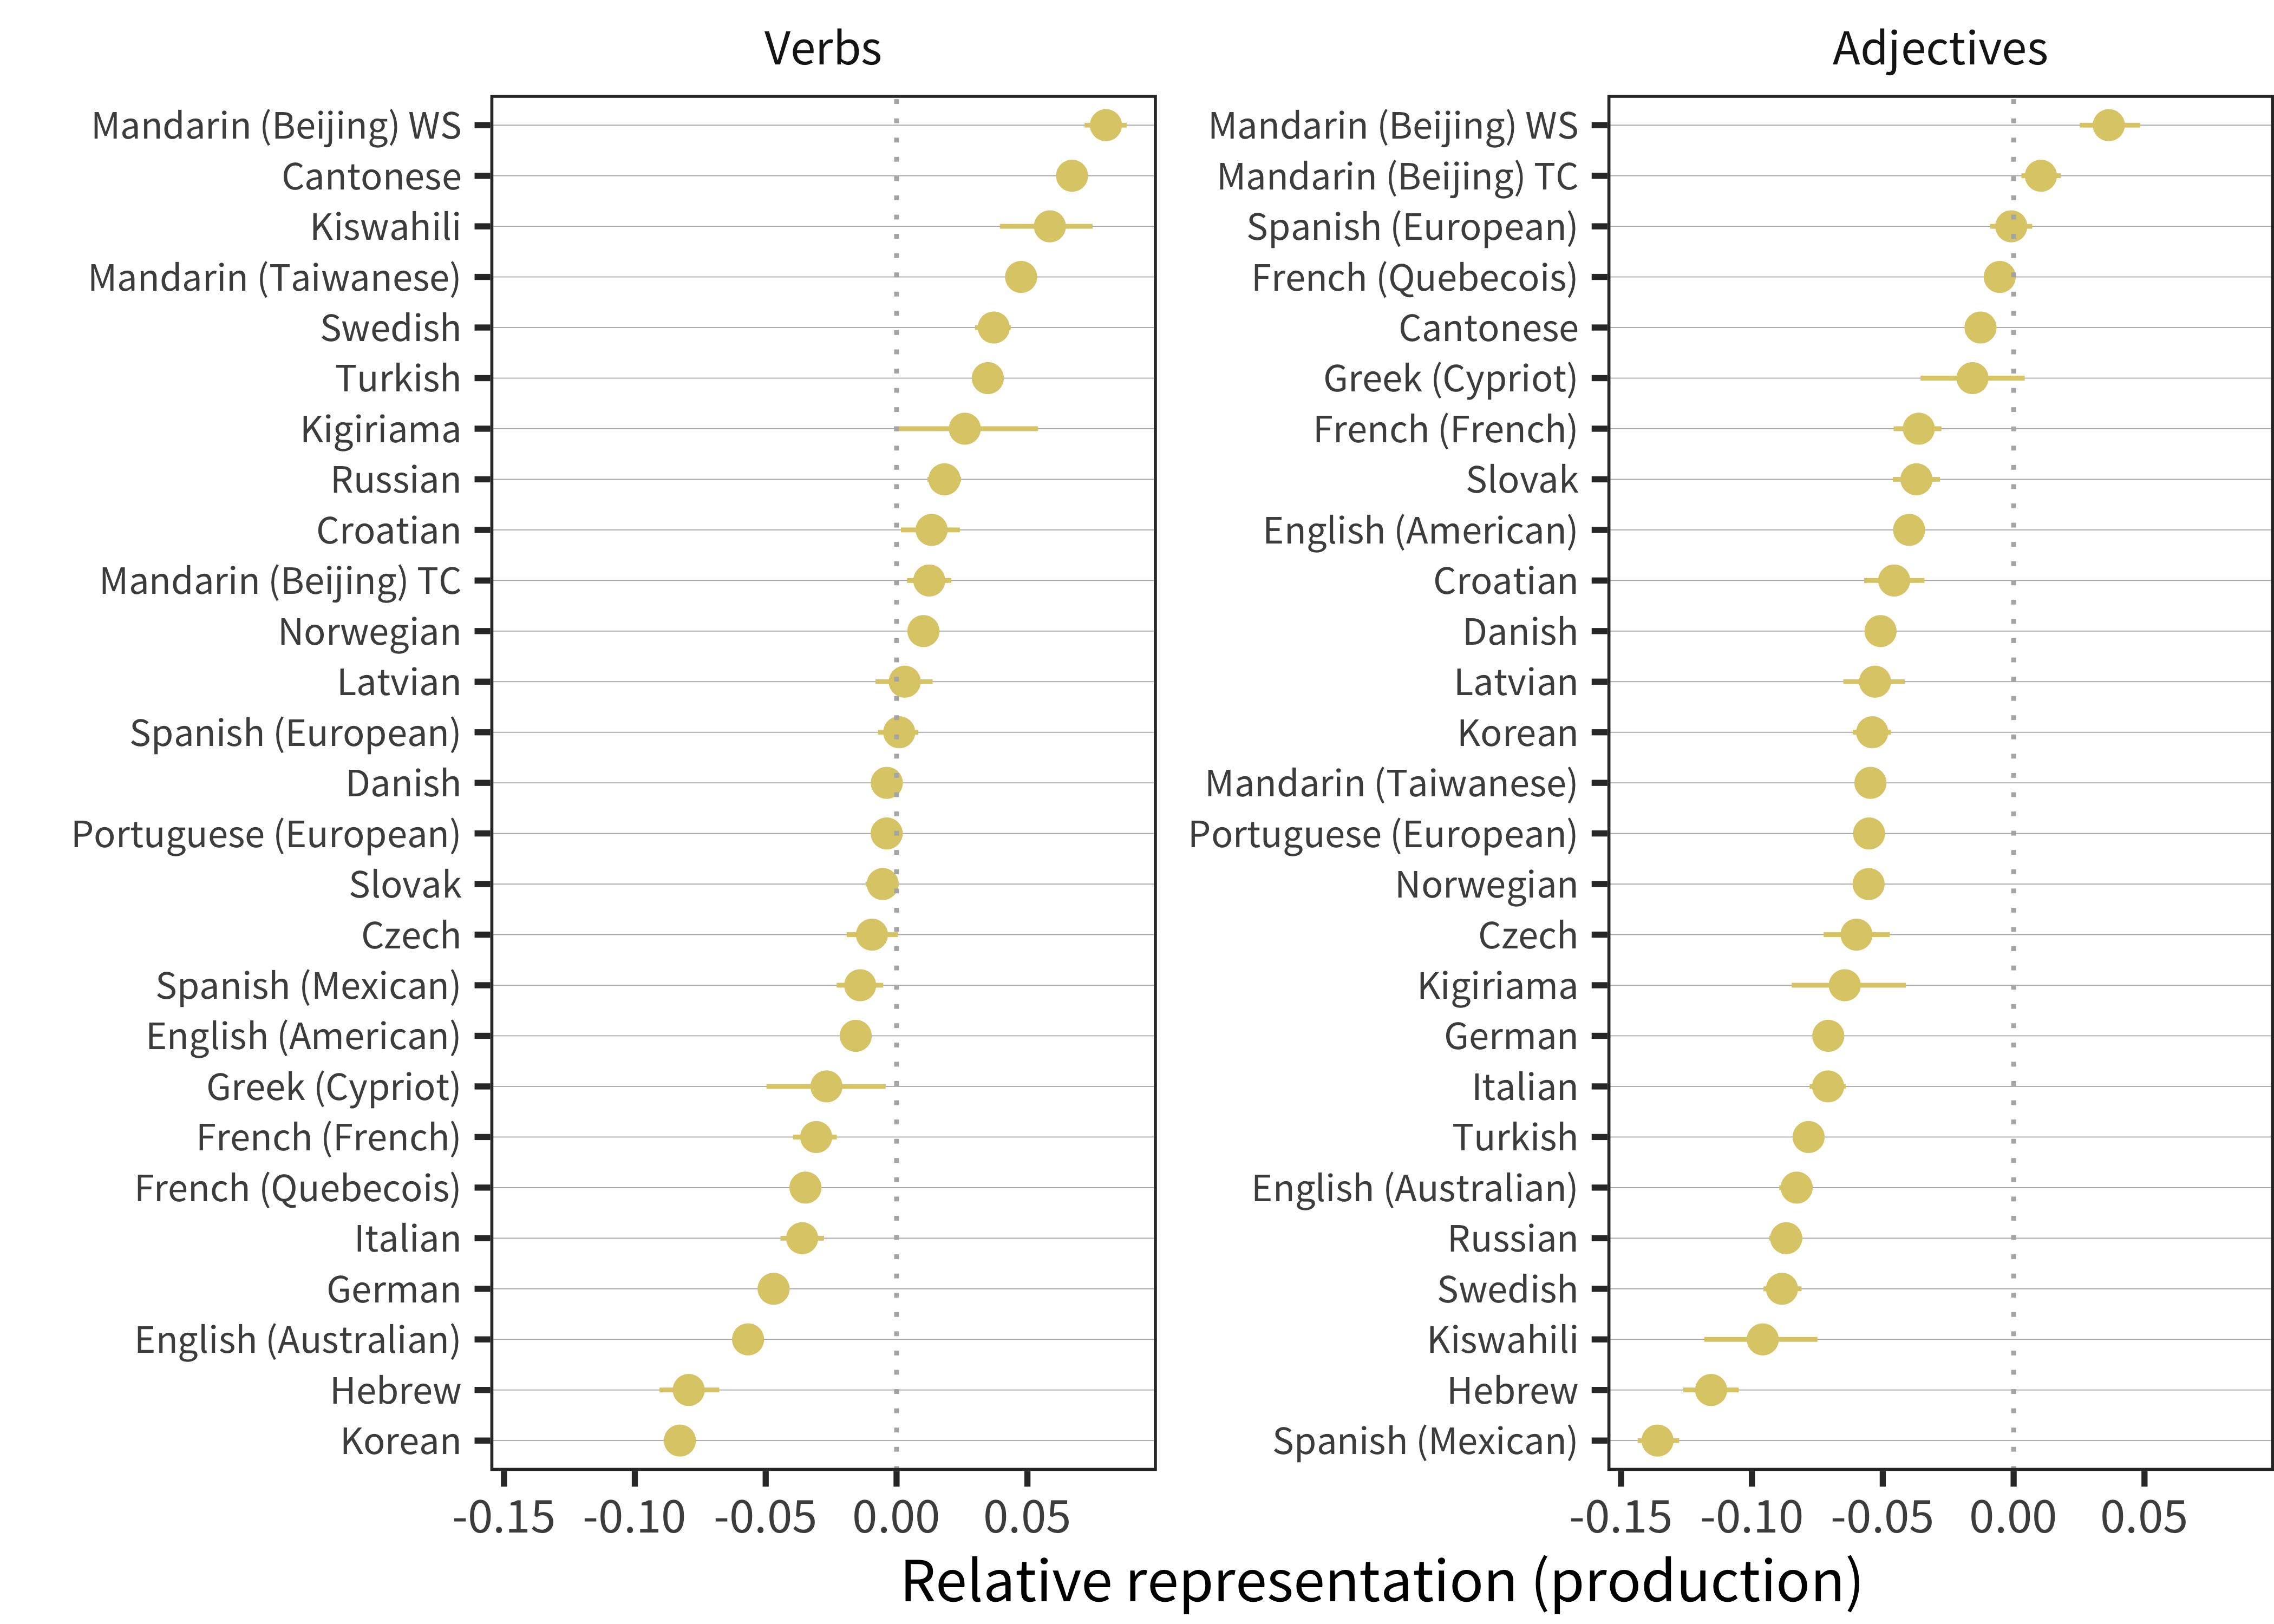 Relative representation in vocabulary compared to chance for verbs and adjectives for production data in each language (line ranges indicate bootstrapped 95\% confidence intervals).